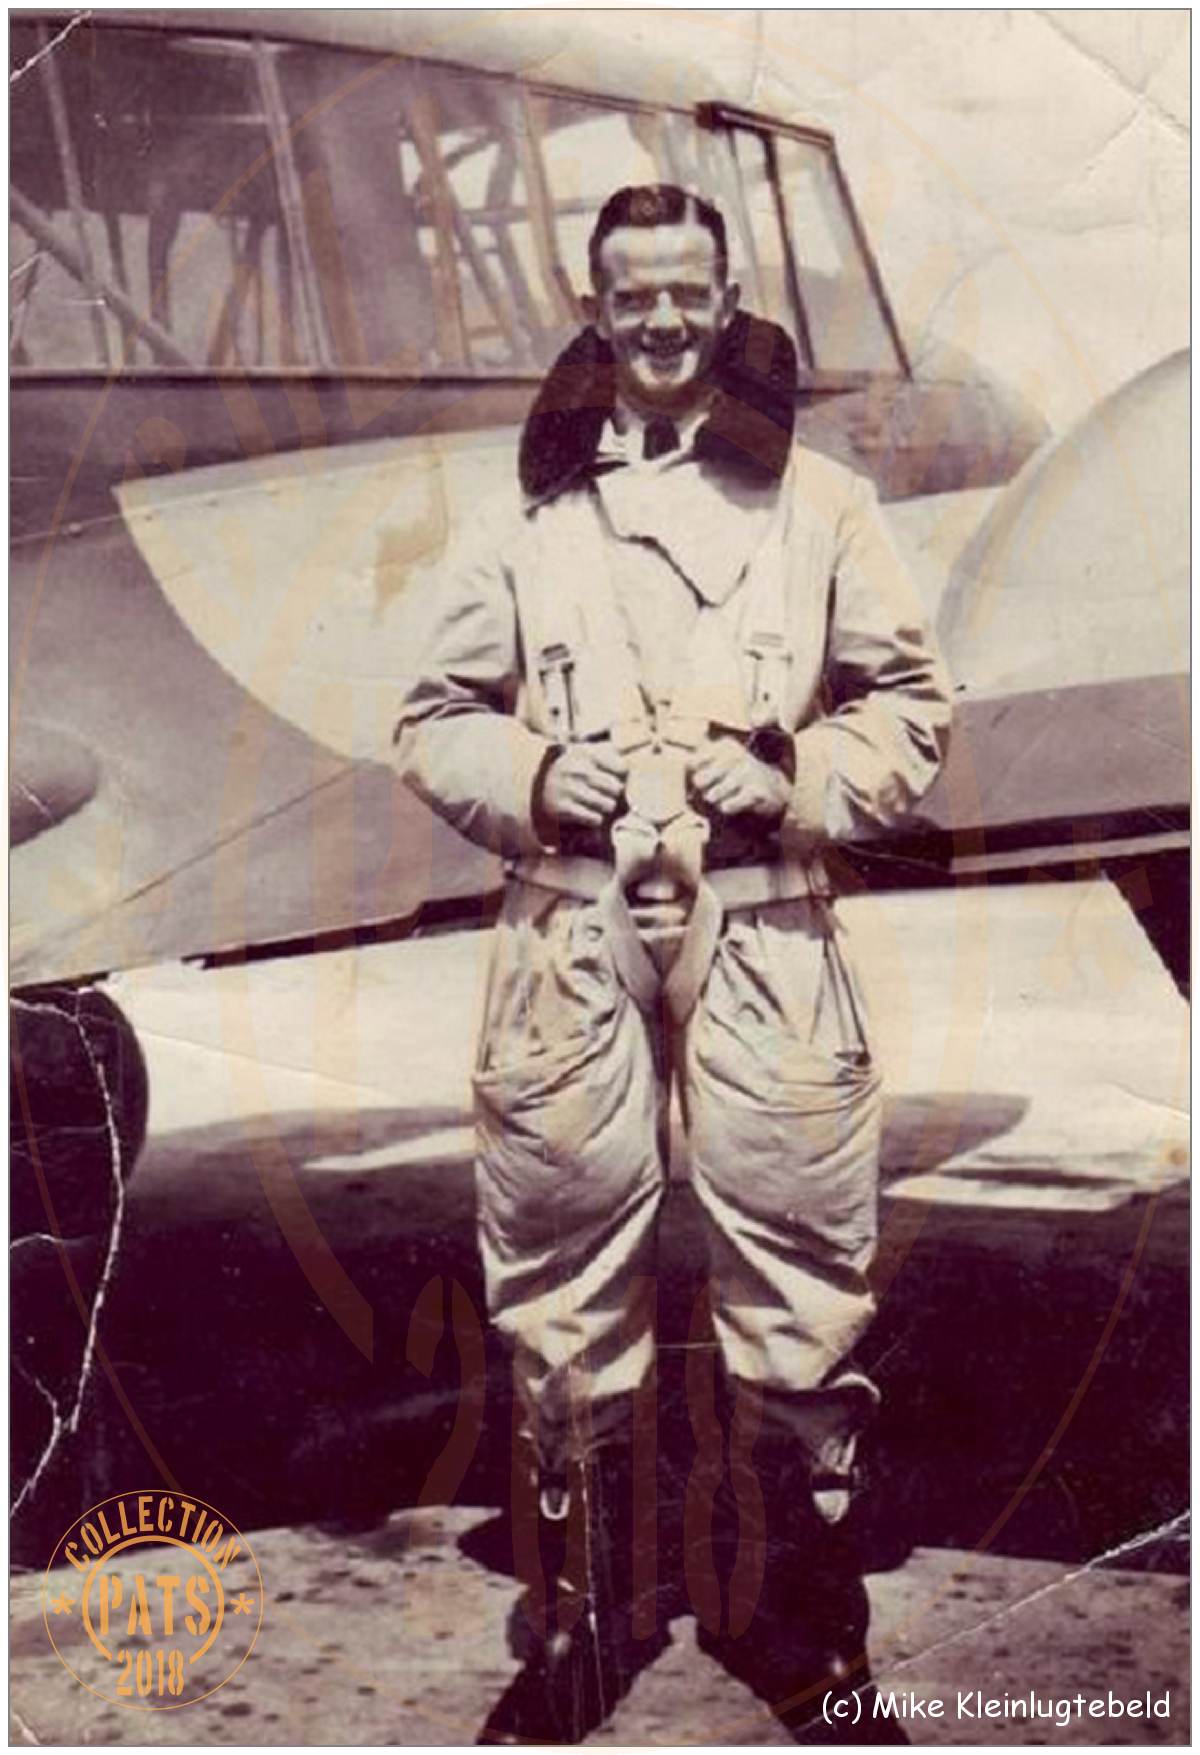 Navigator - William James 'Jim' Farrelly - while on training in Canada